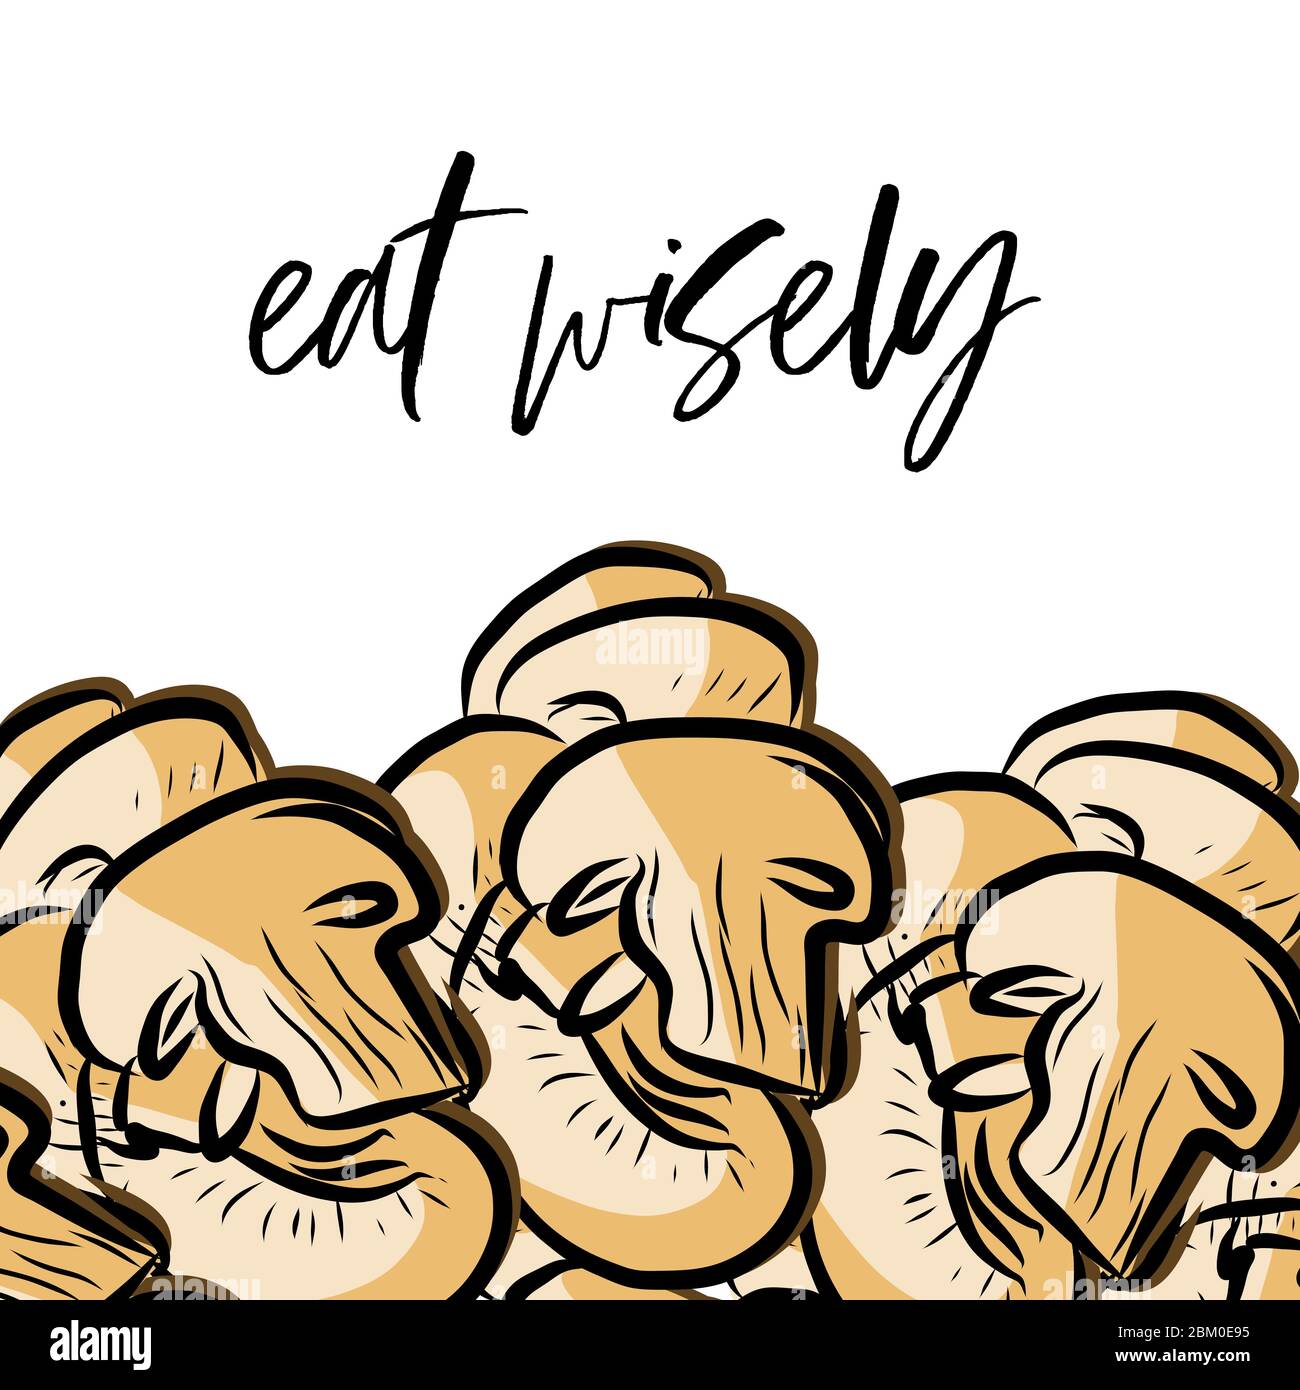 eat wisely lettering and Mushrooms advertising template. Hand drawn Illustration, handwritten on white background. Stock Vector